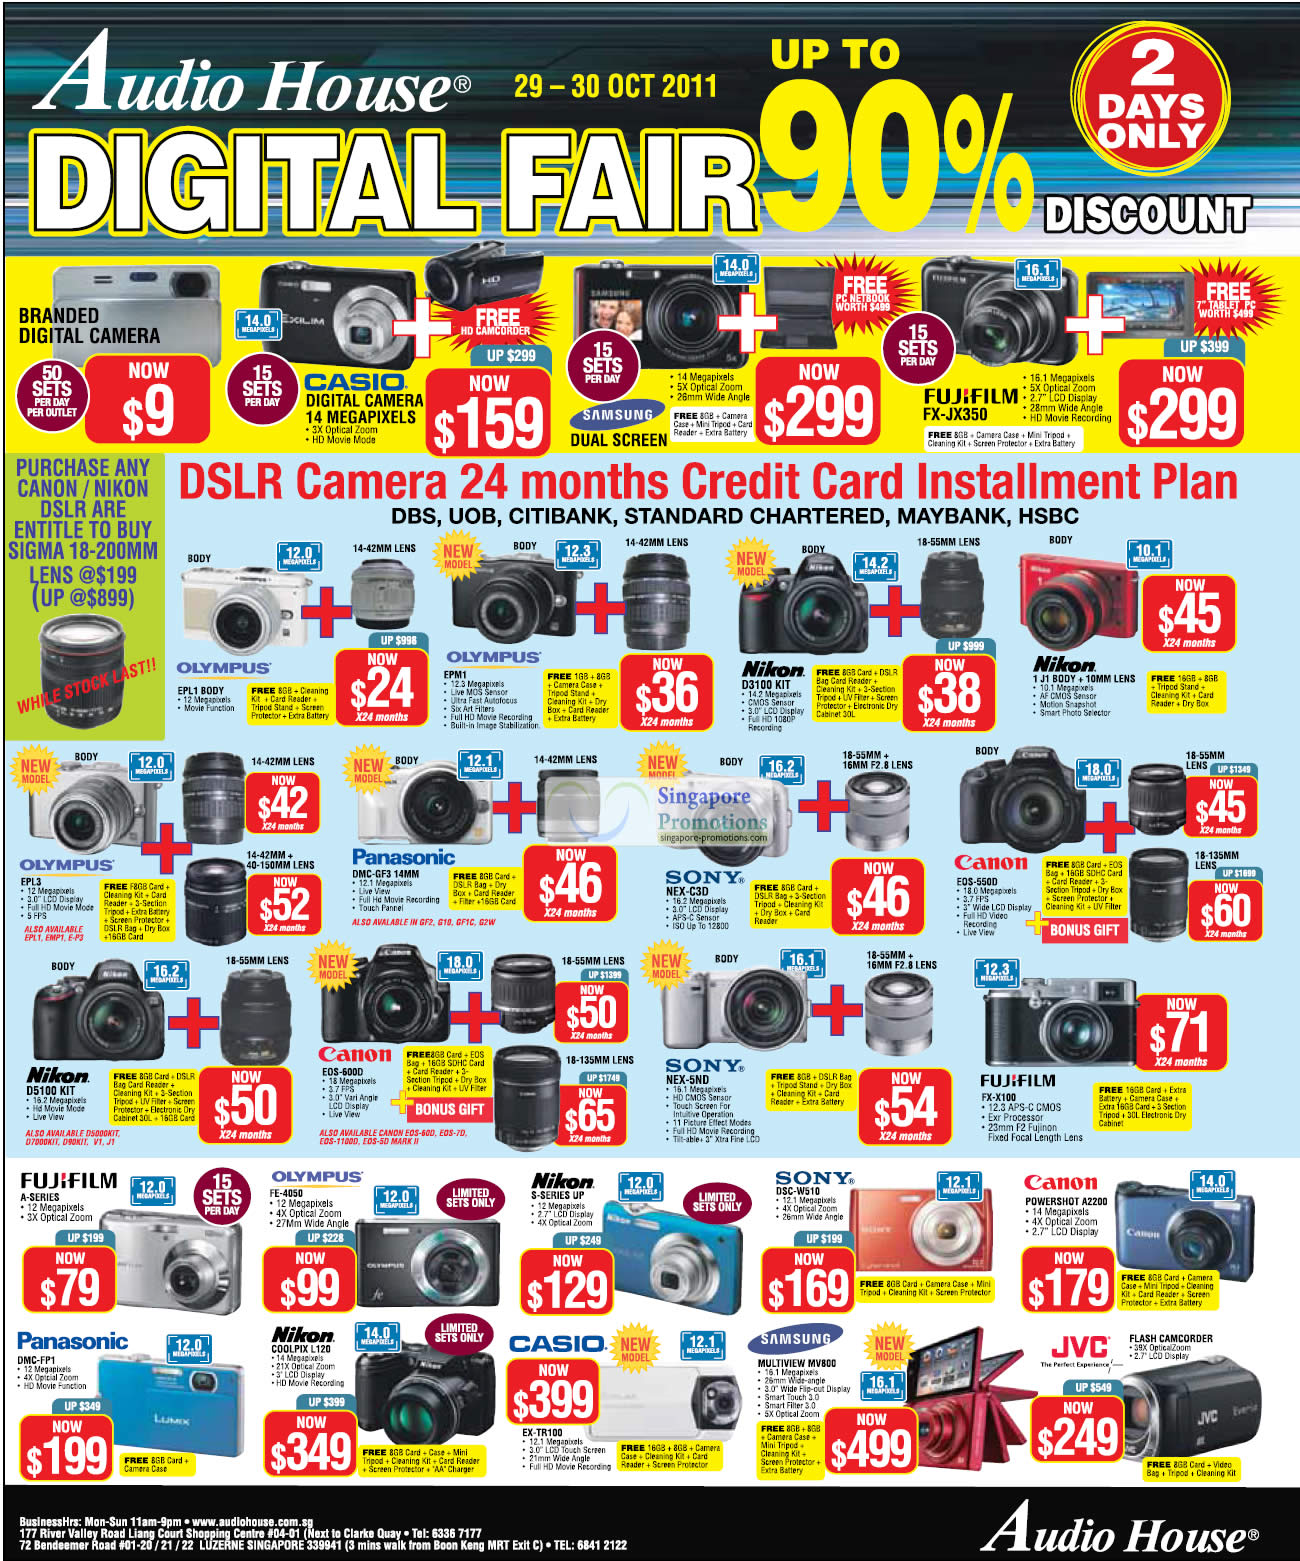 Featured image for Audio House Digital Fair Up To 90% Off 29 - 30 Oct 2011